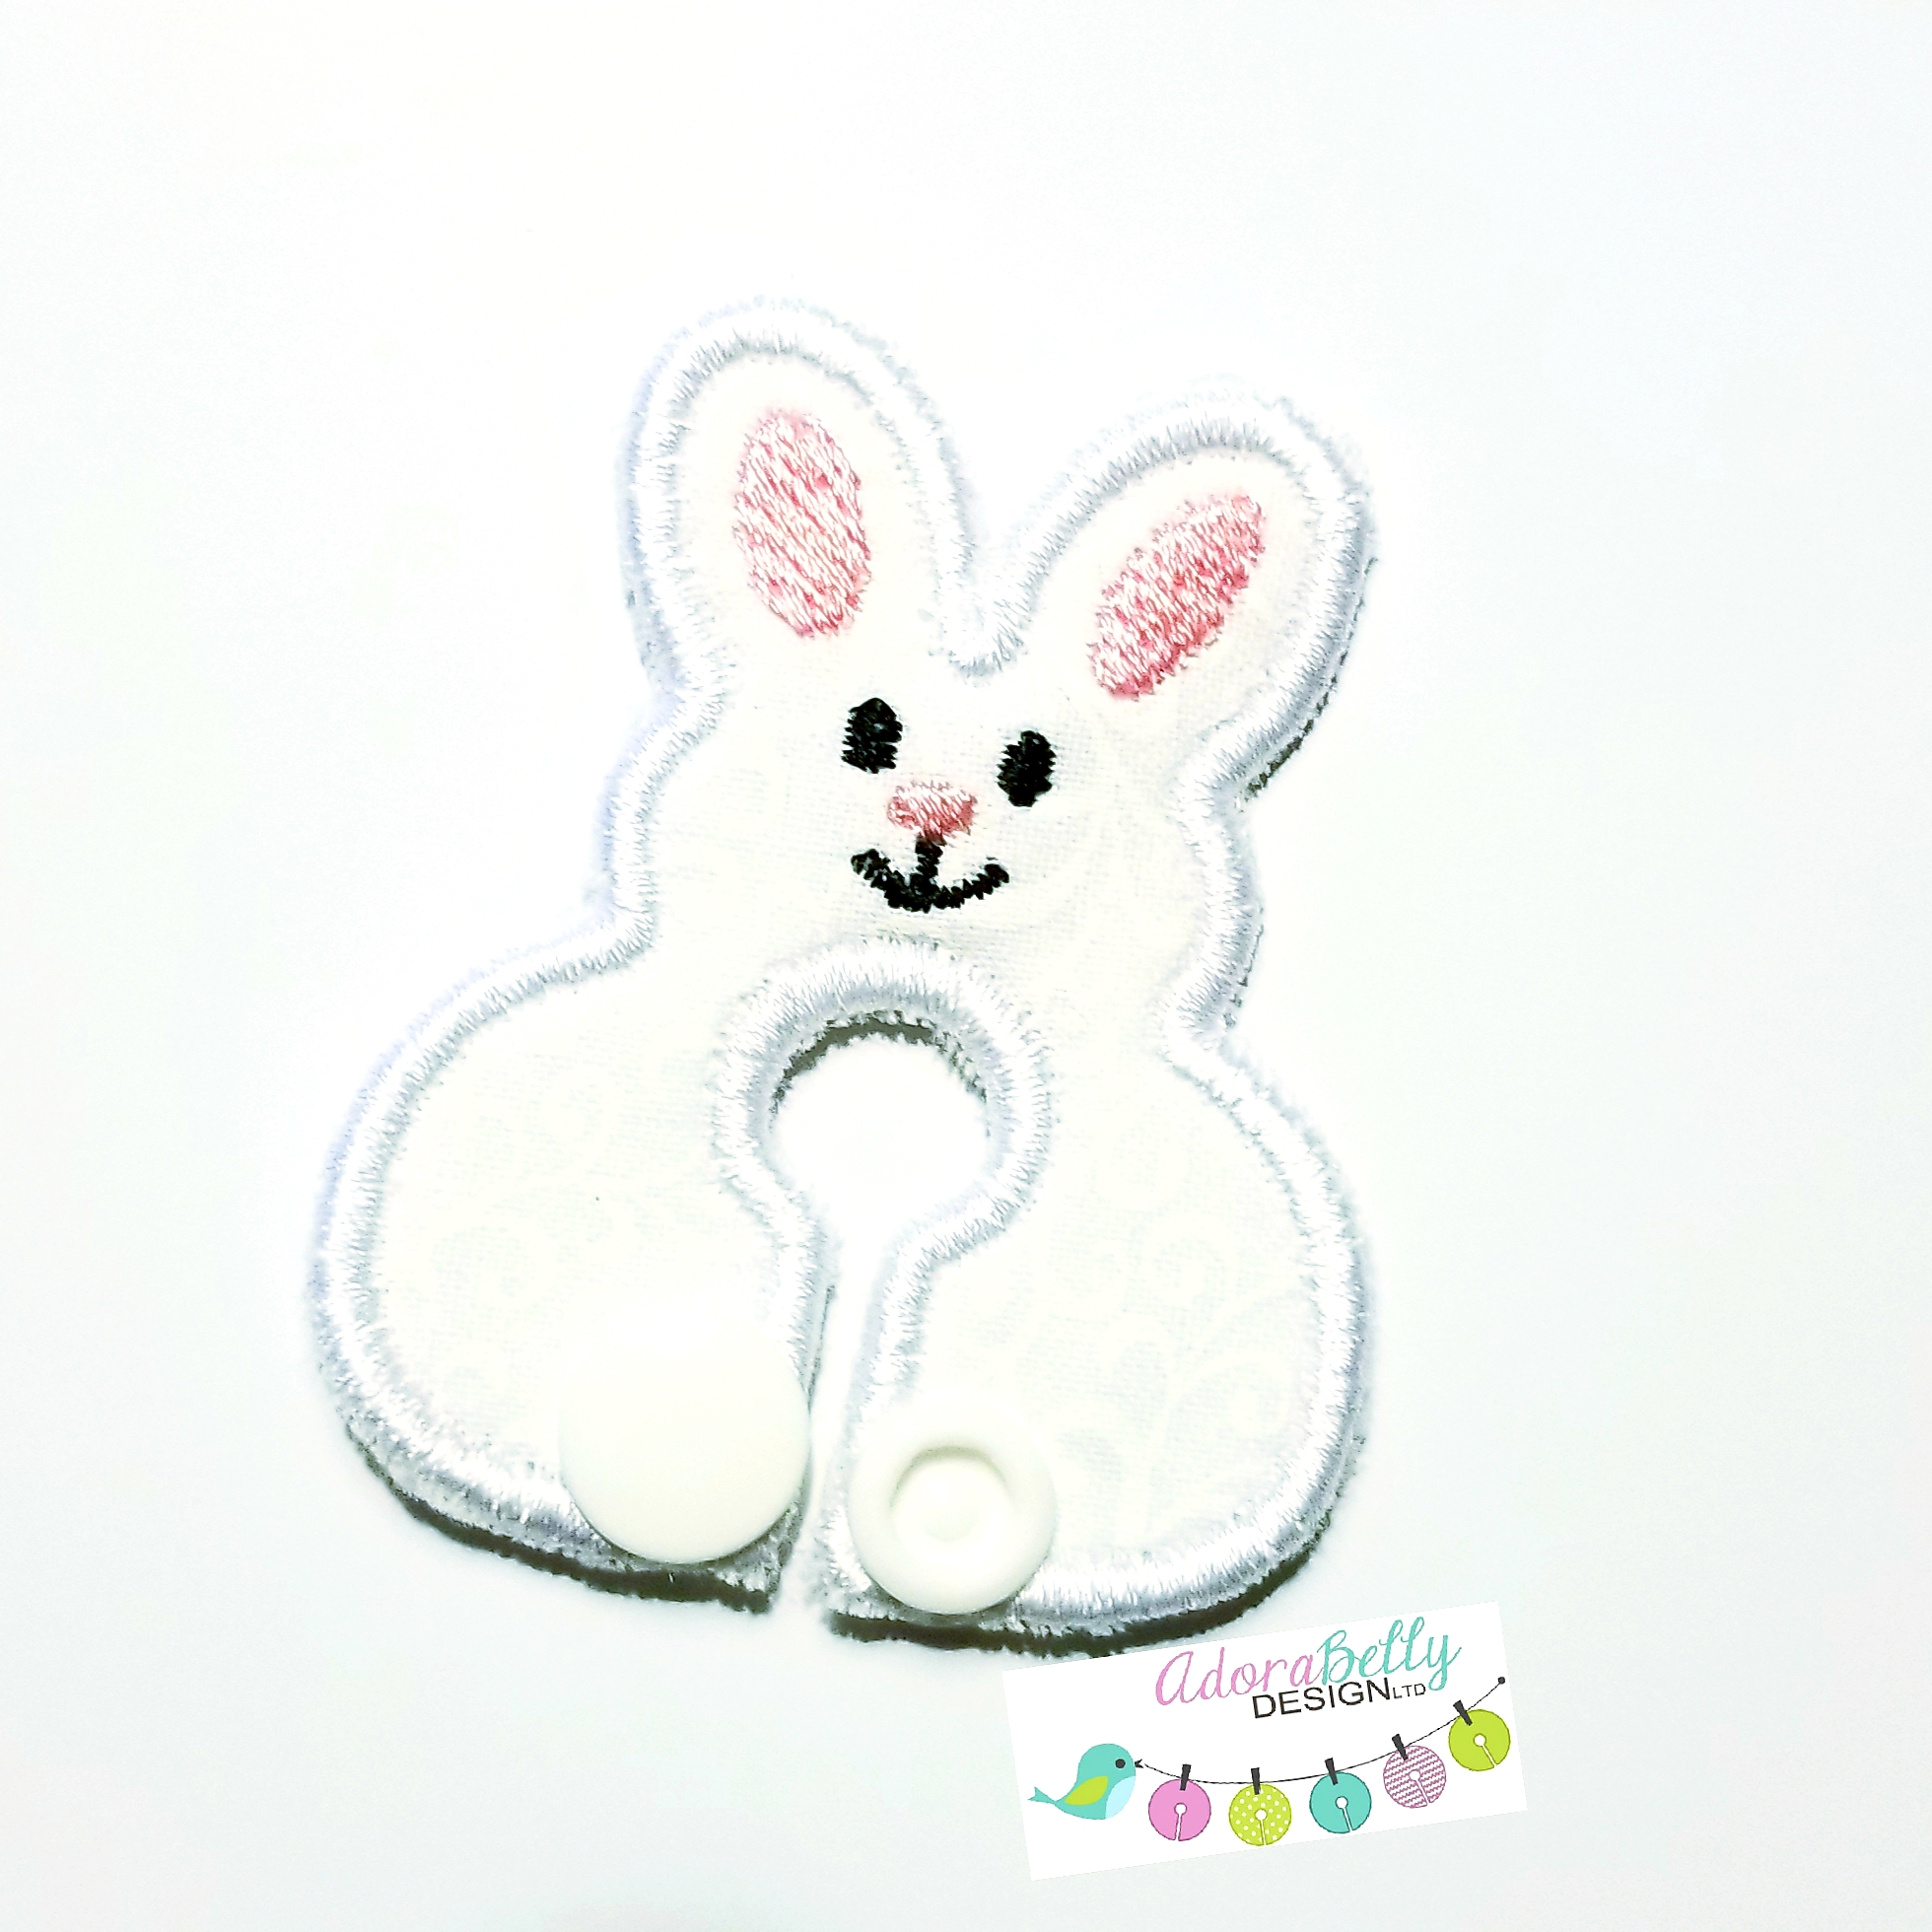 Feeding / G-Tube Cover Shaped Like Bunny, White with Pink Accents